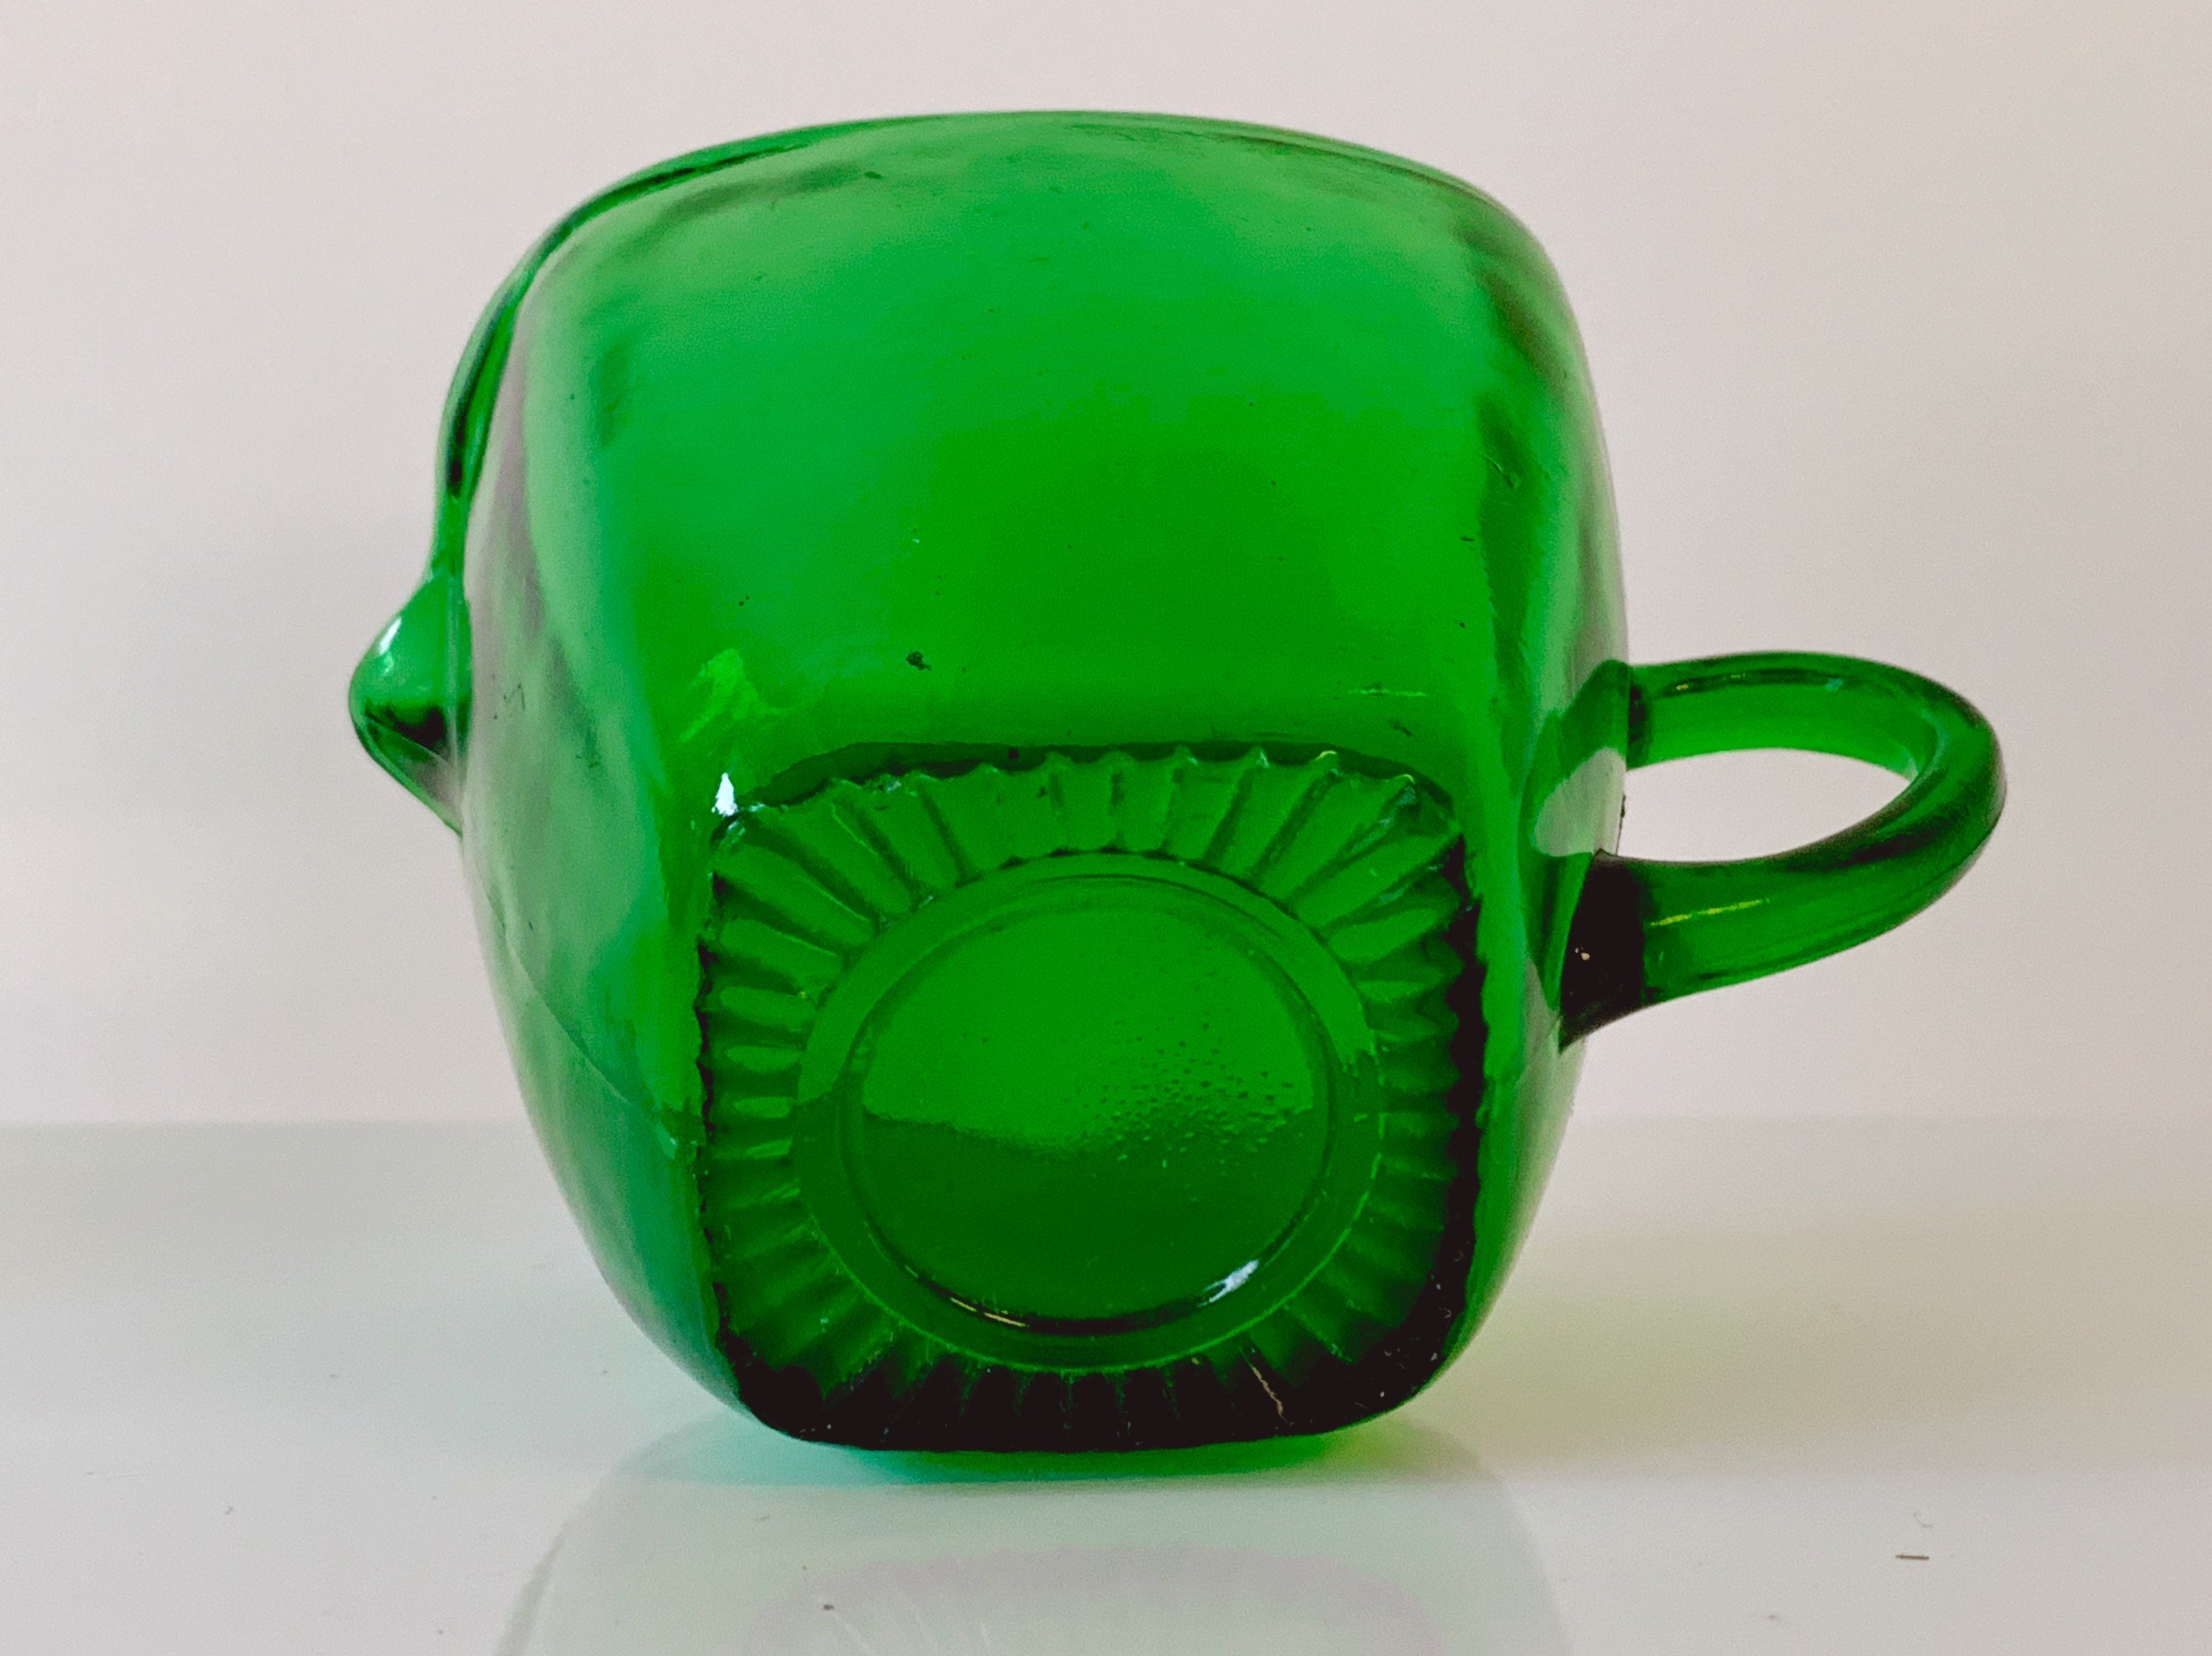 Vintage 1950s Anchor Hocking Emerald Green Glass Creamer and Sugar Bowl Set | Tableware Jewelry Dish Catchall Bowl | Mother's Day Gift